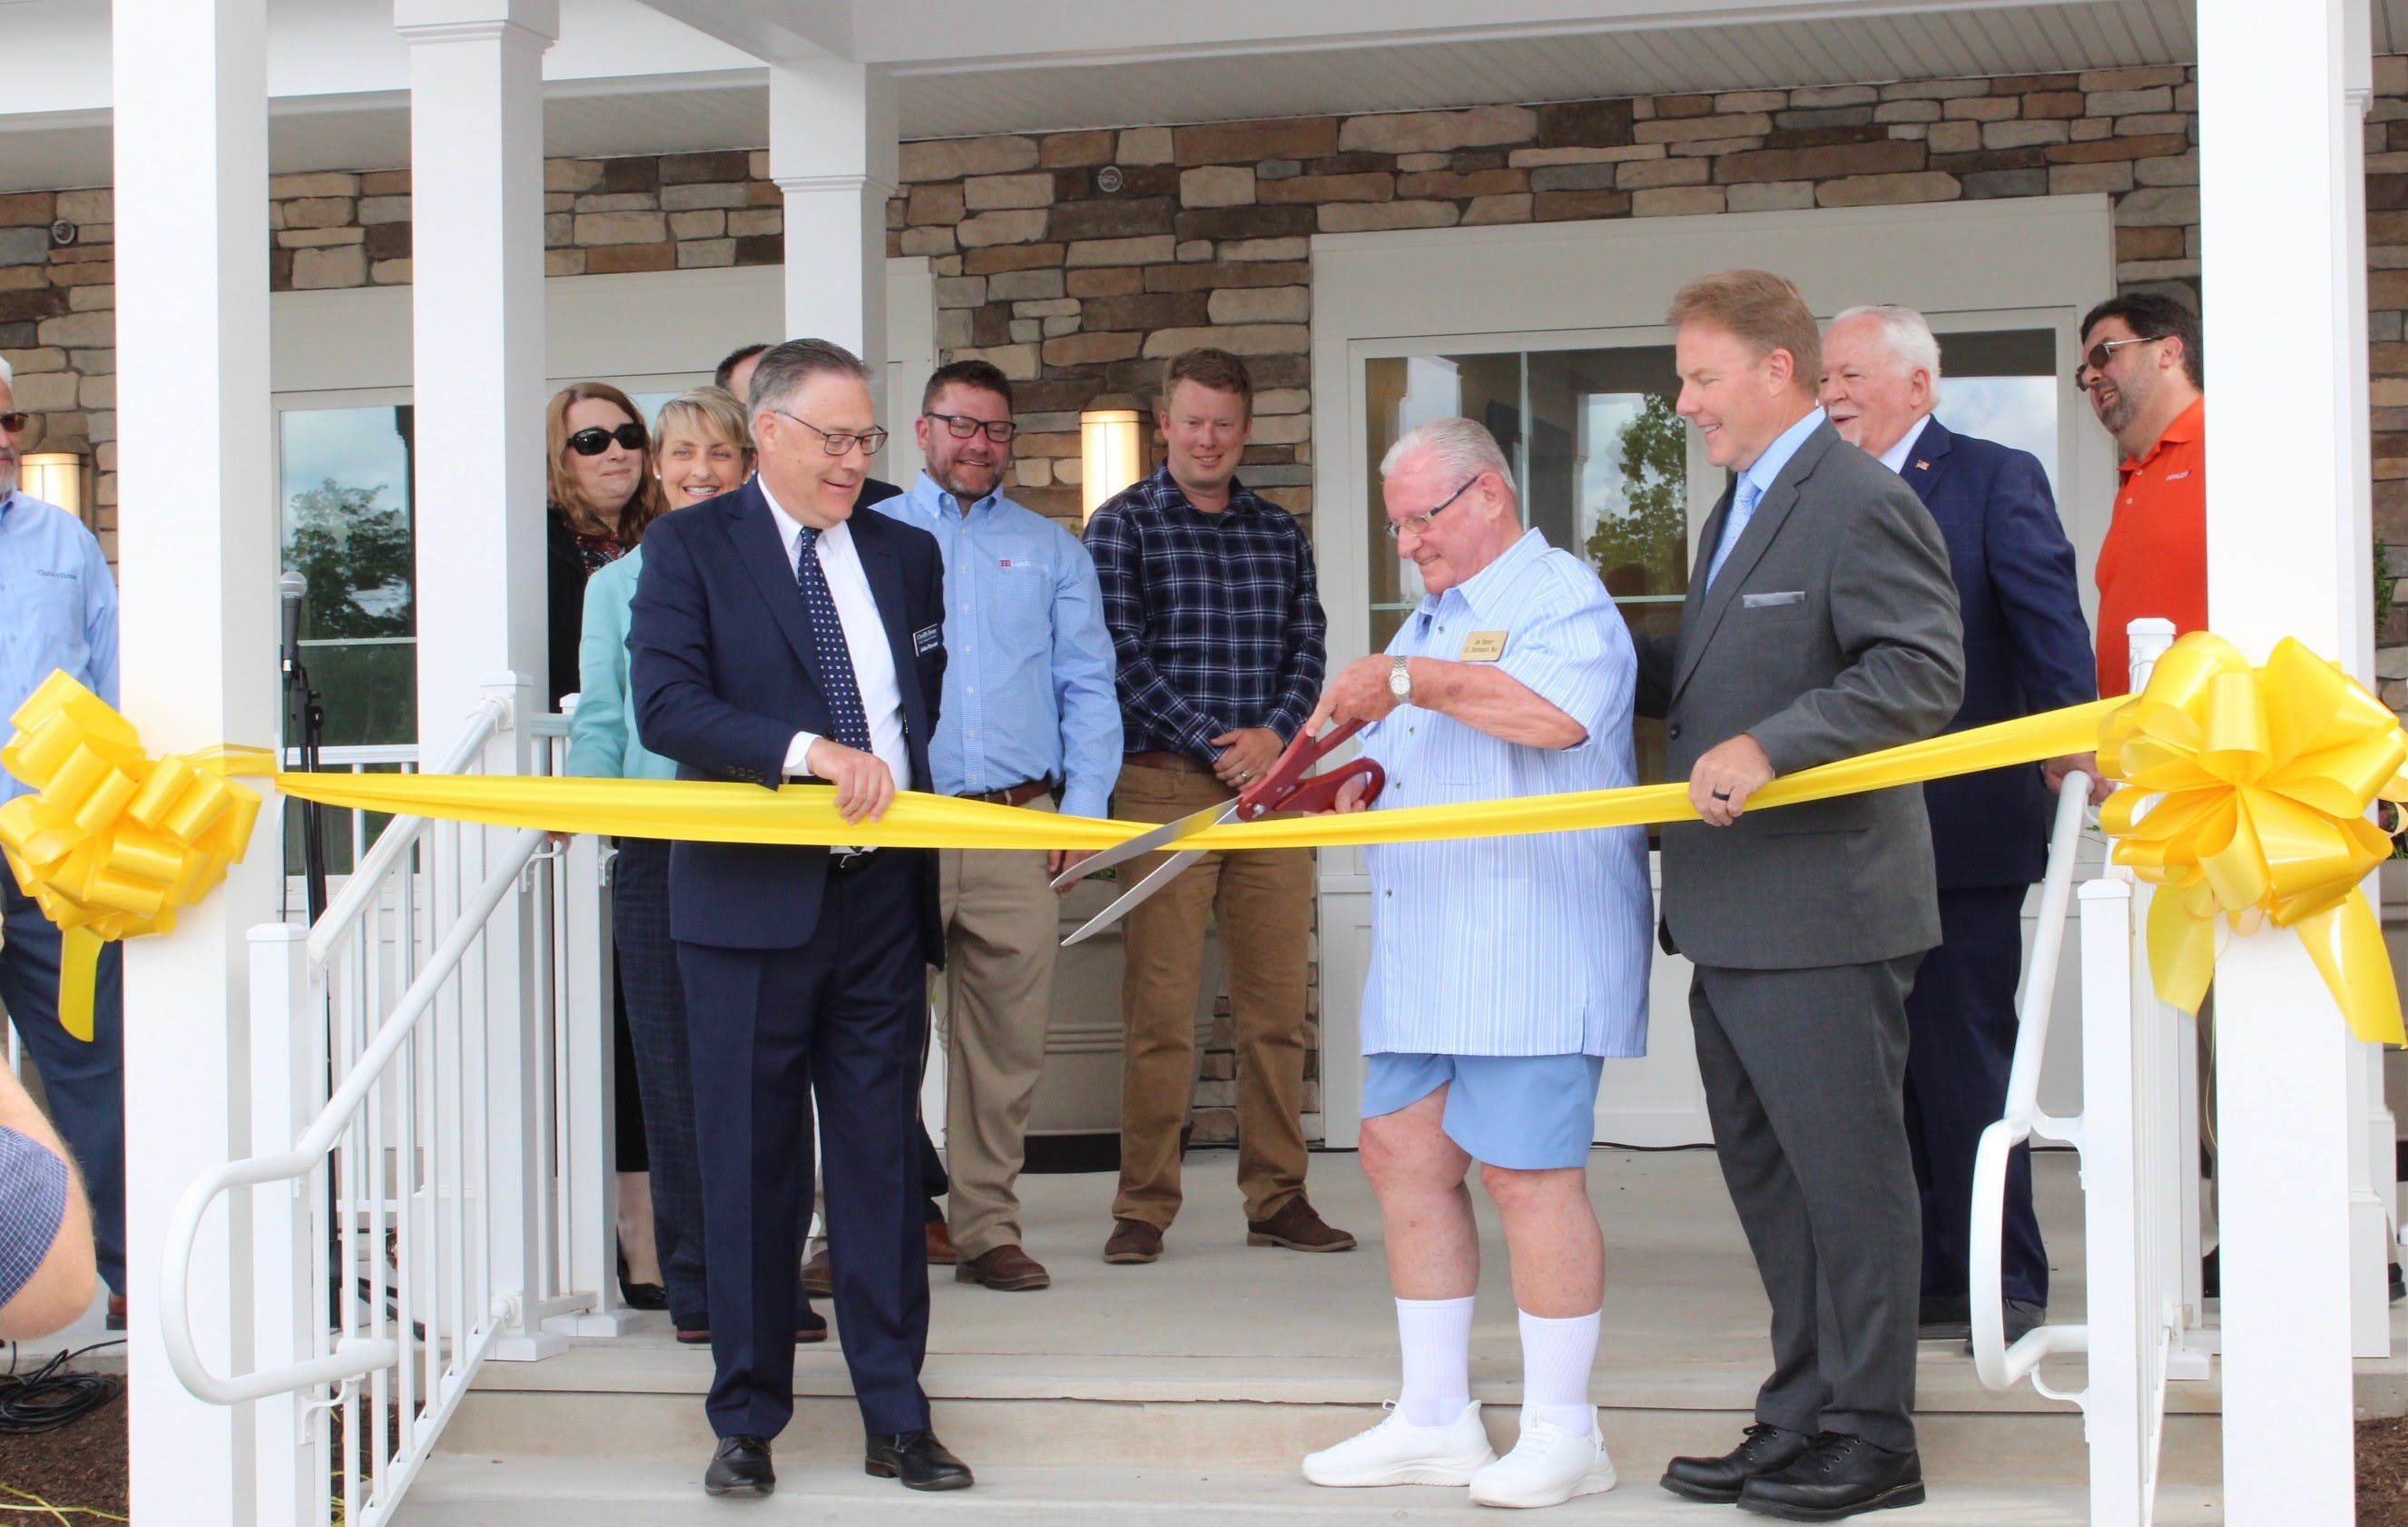 Christ's Home Celebrates New Addition With Ribbon Cutting.